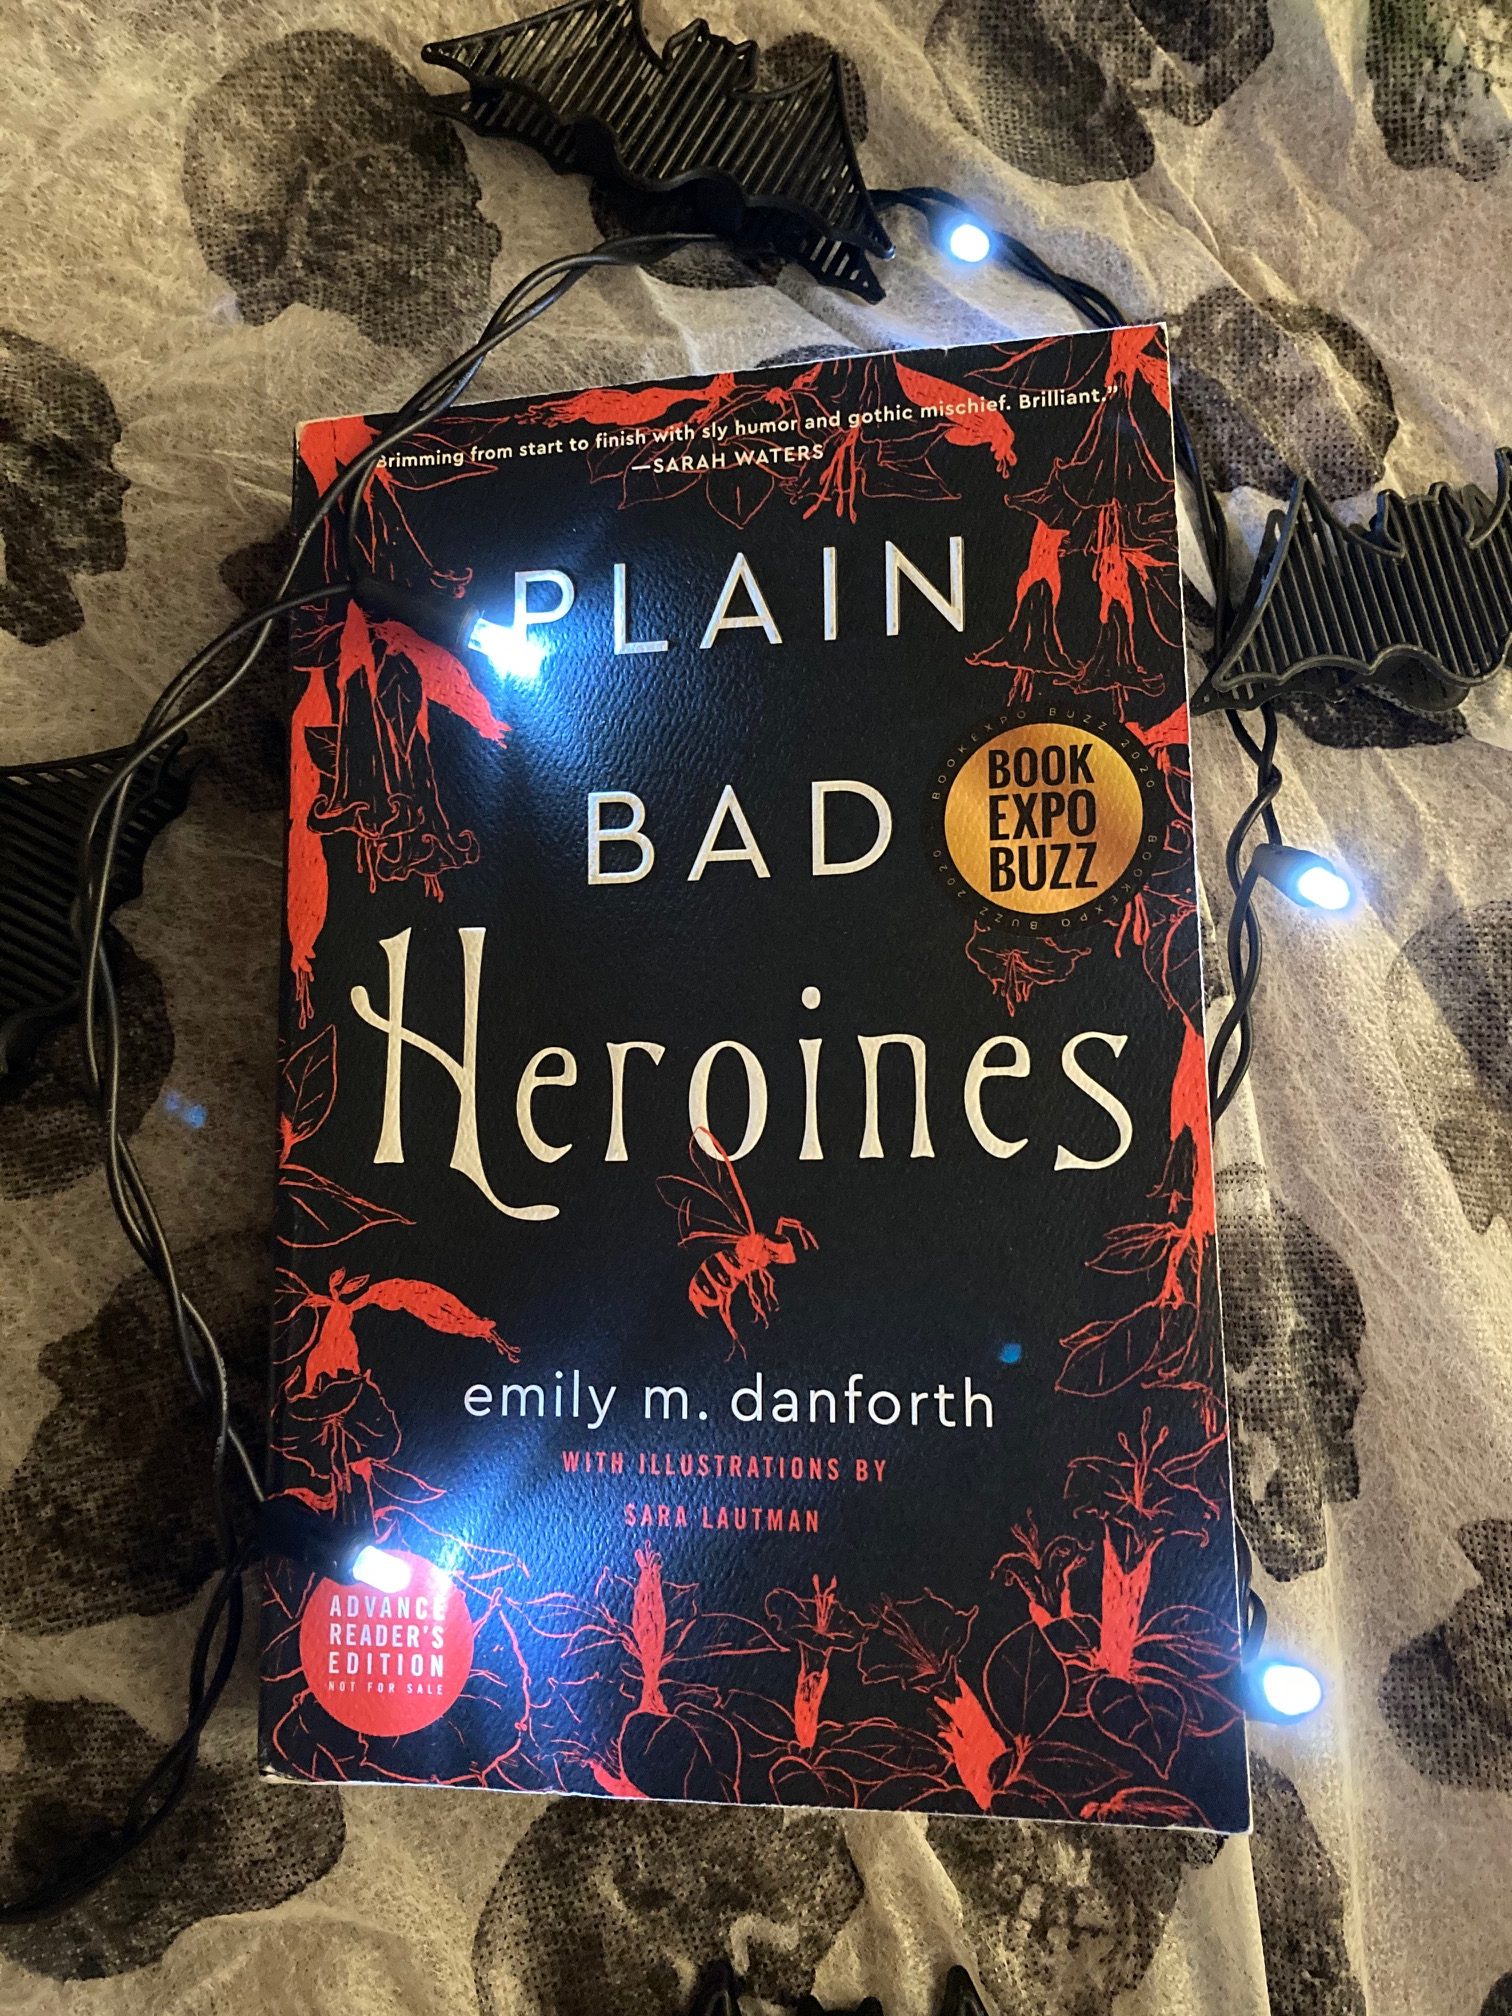 cover image of Plain Bad Heroines by emily m. danforth